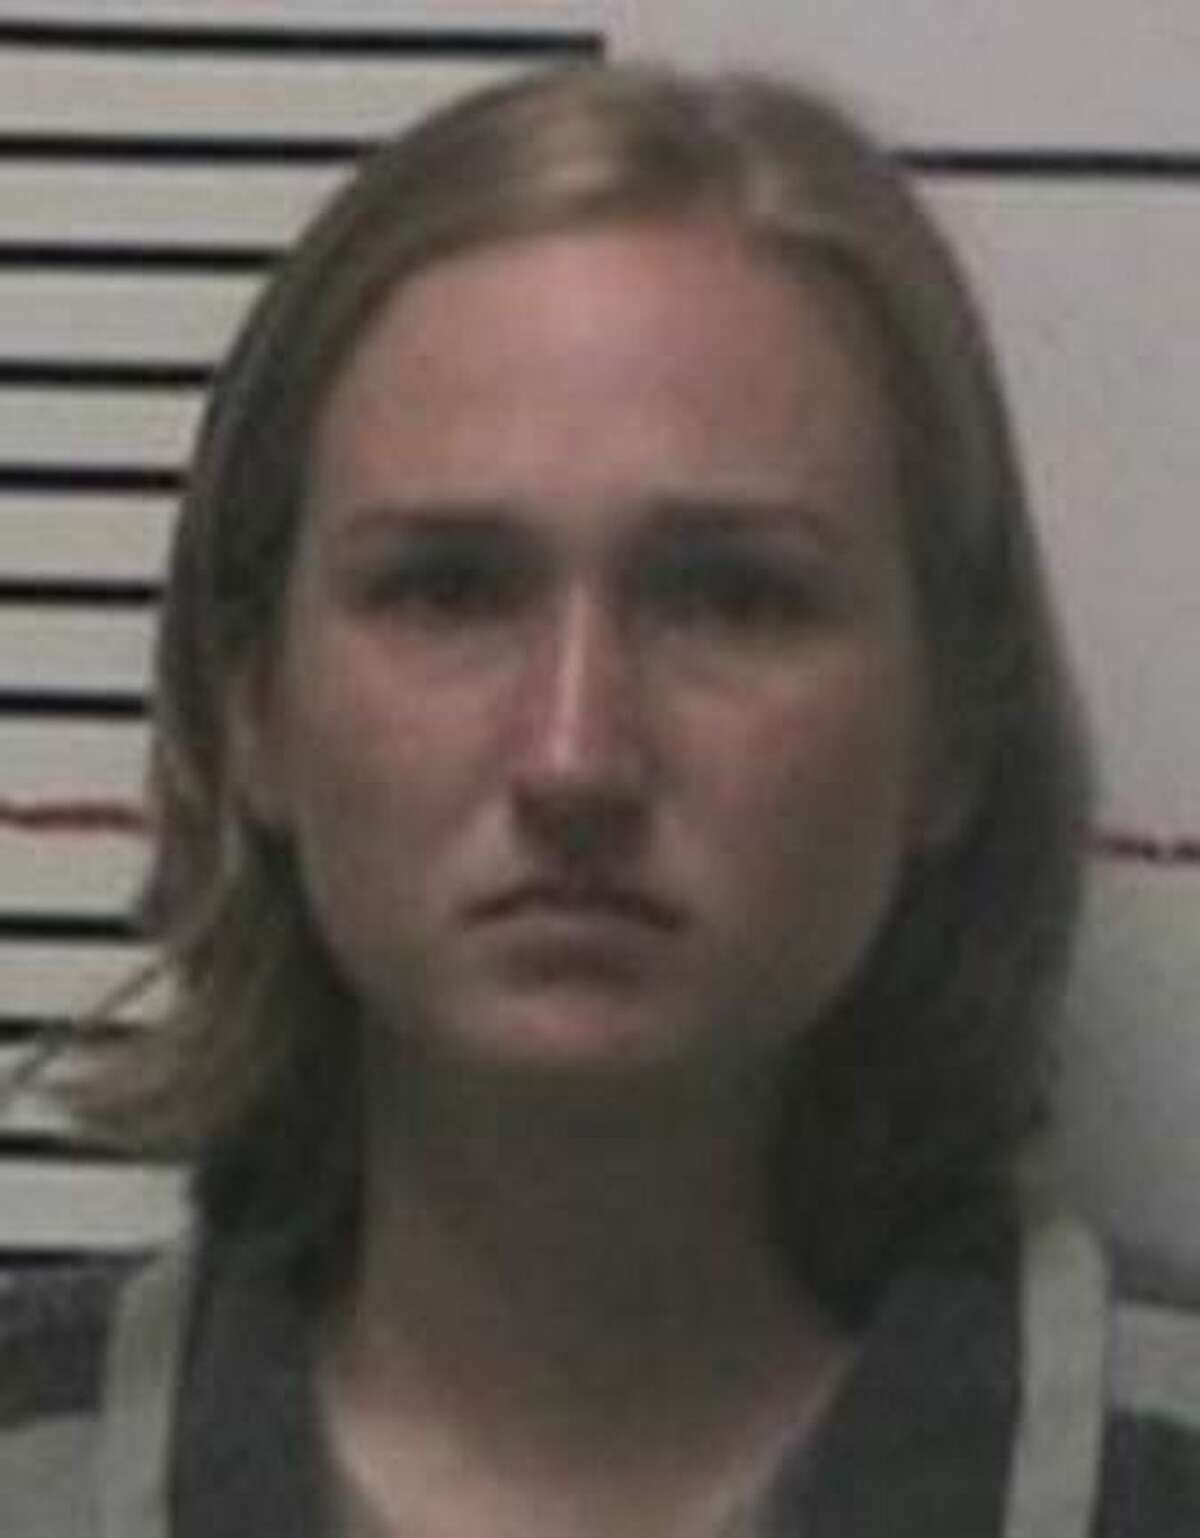 Rachel Bauer — former agriculture teacher at Frankston High School, about 90 miles southeast of Dallas — will serve 10 years on one second-degree felony count of improper relationship between an educator and student. Bauer must also register as a sex offender and serve 10 years deferred adjudication probation on a second-degree felony charge of sexual assault of a child following her prison term.